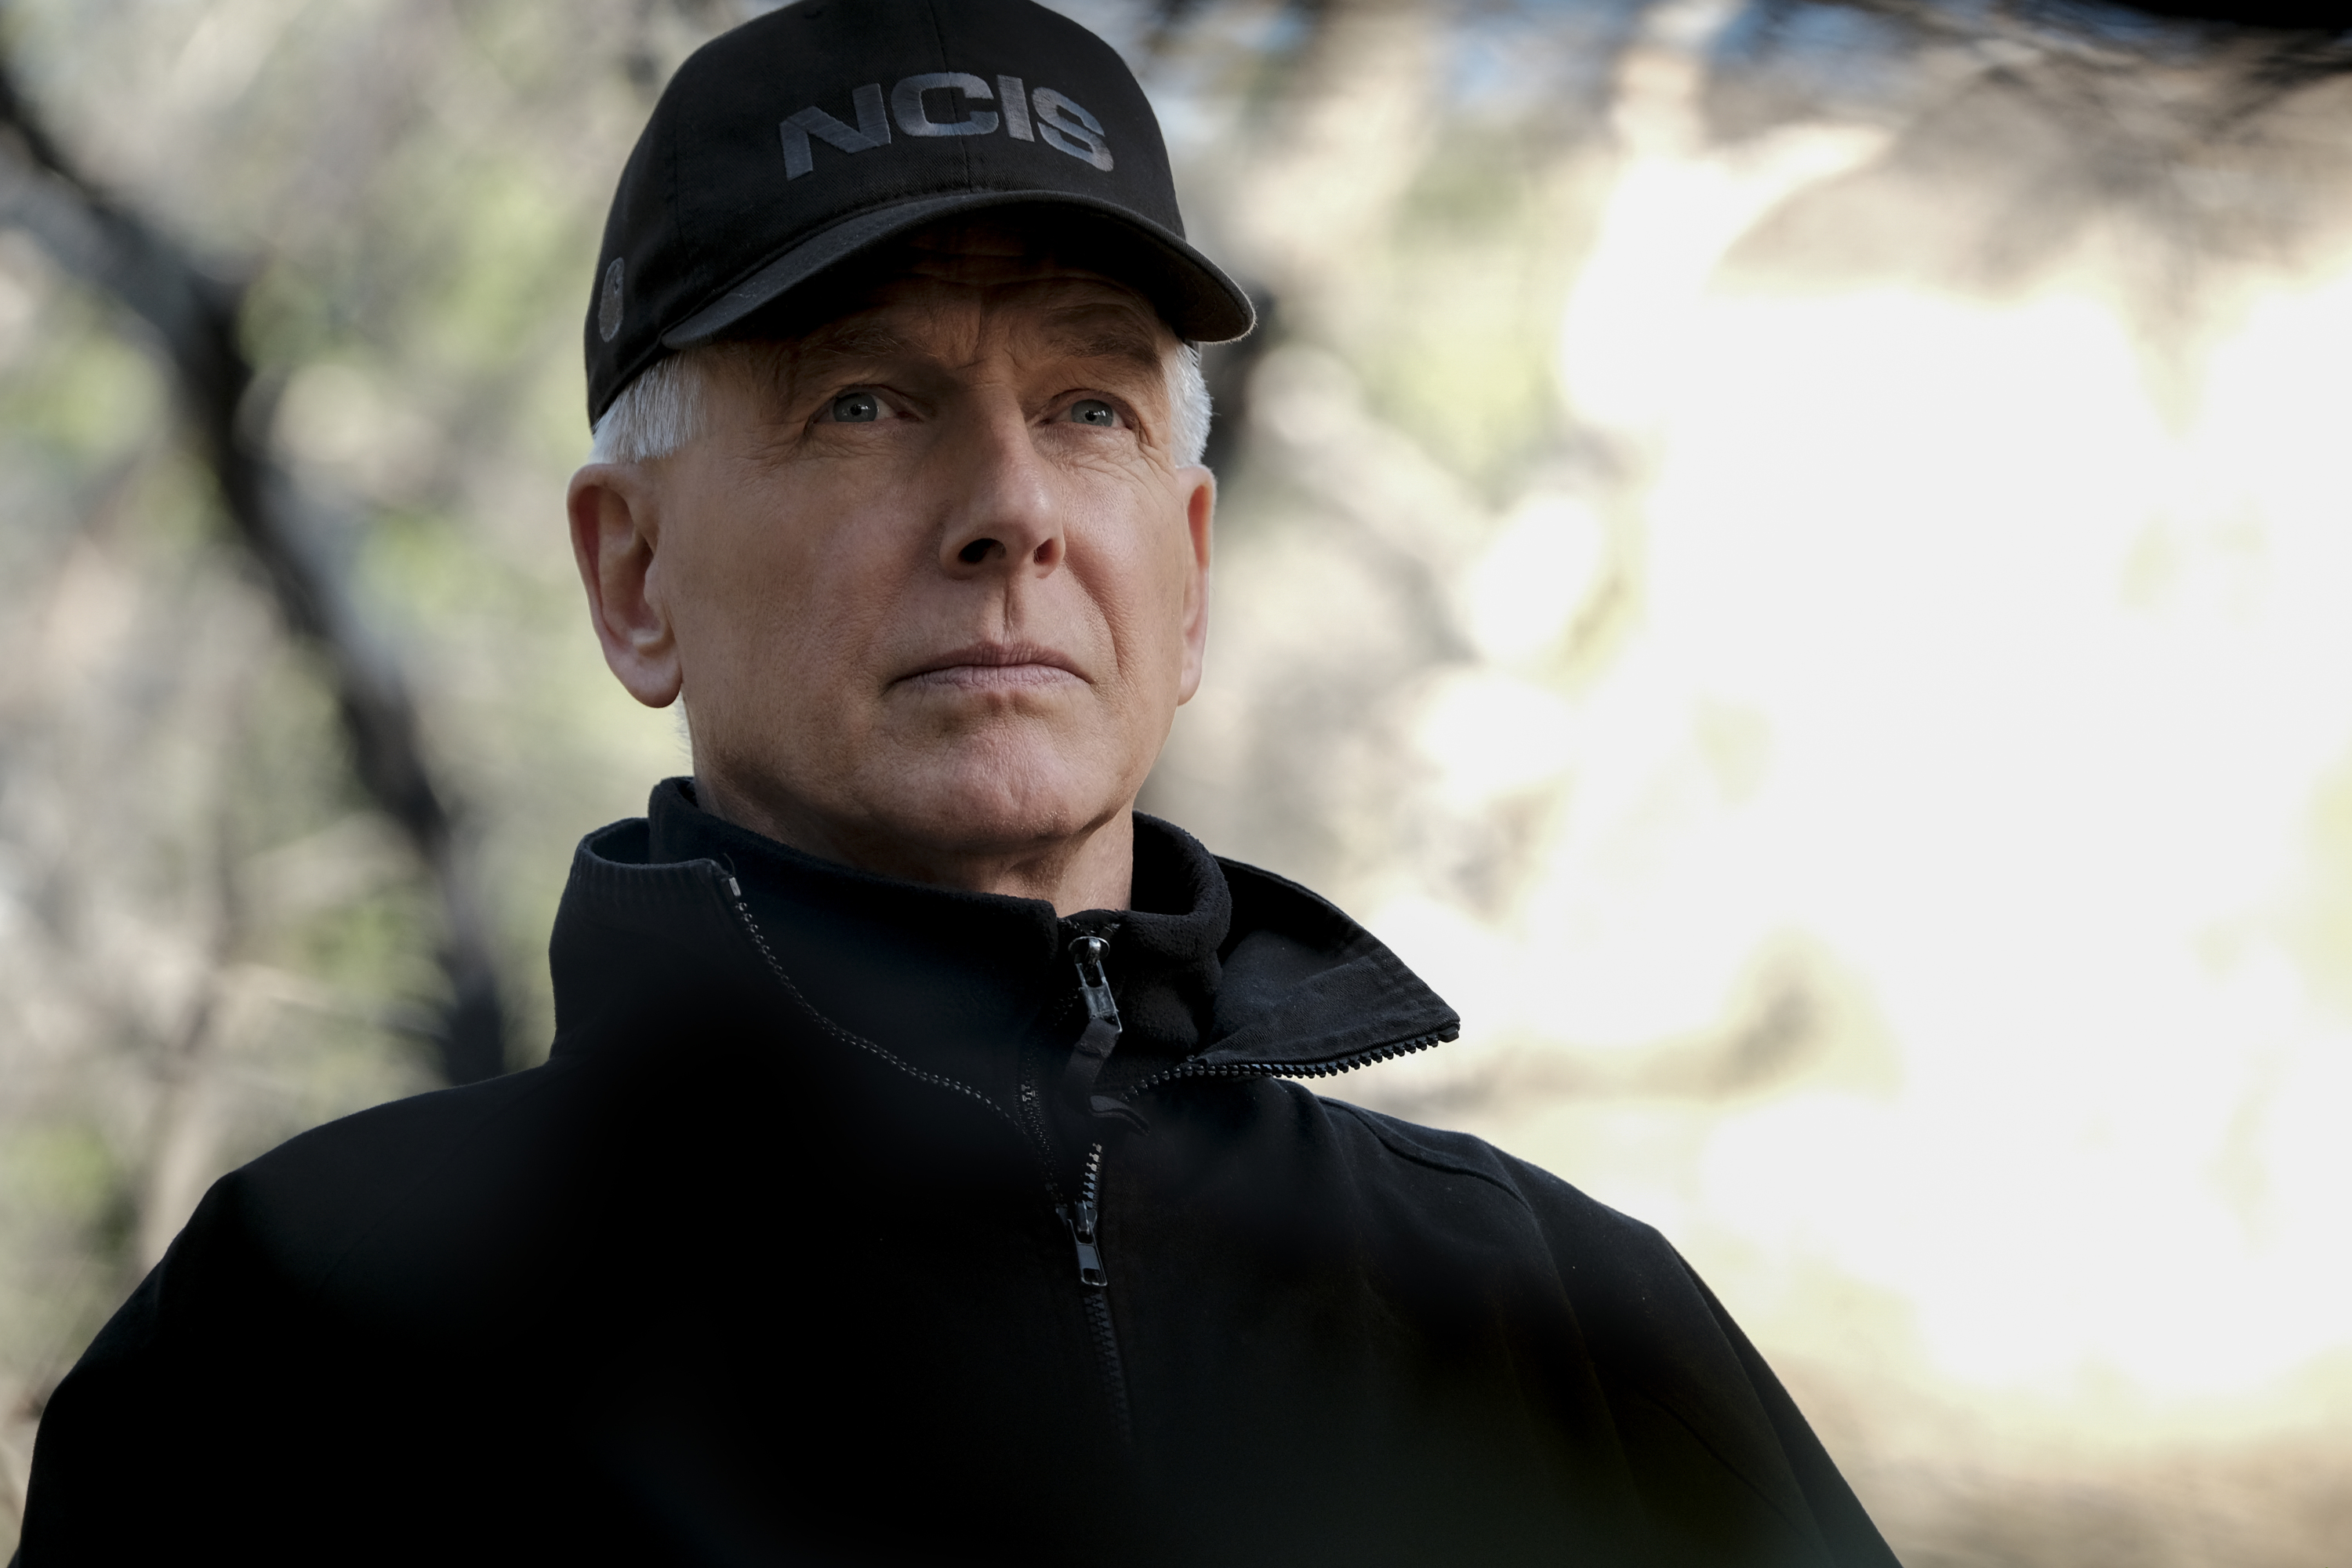 Mark Harmon poses in his NCIS hat on the set of NCIS. 